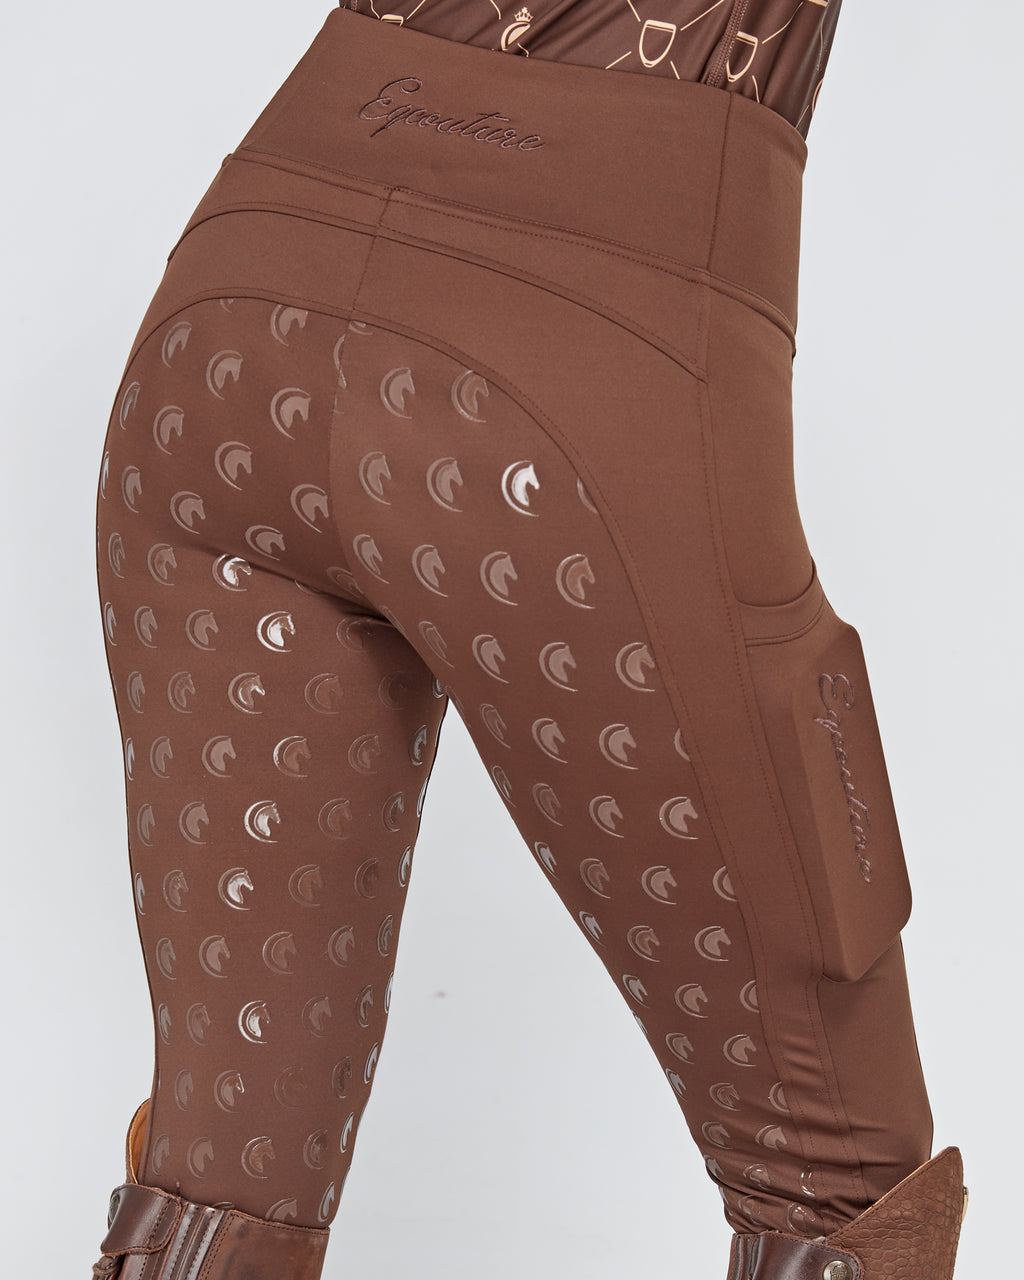 Horse Riding Leggings/Tights with phone pockets - Eqcouture – Page 2